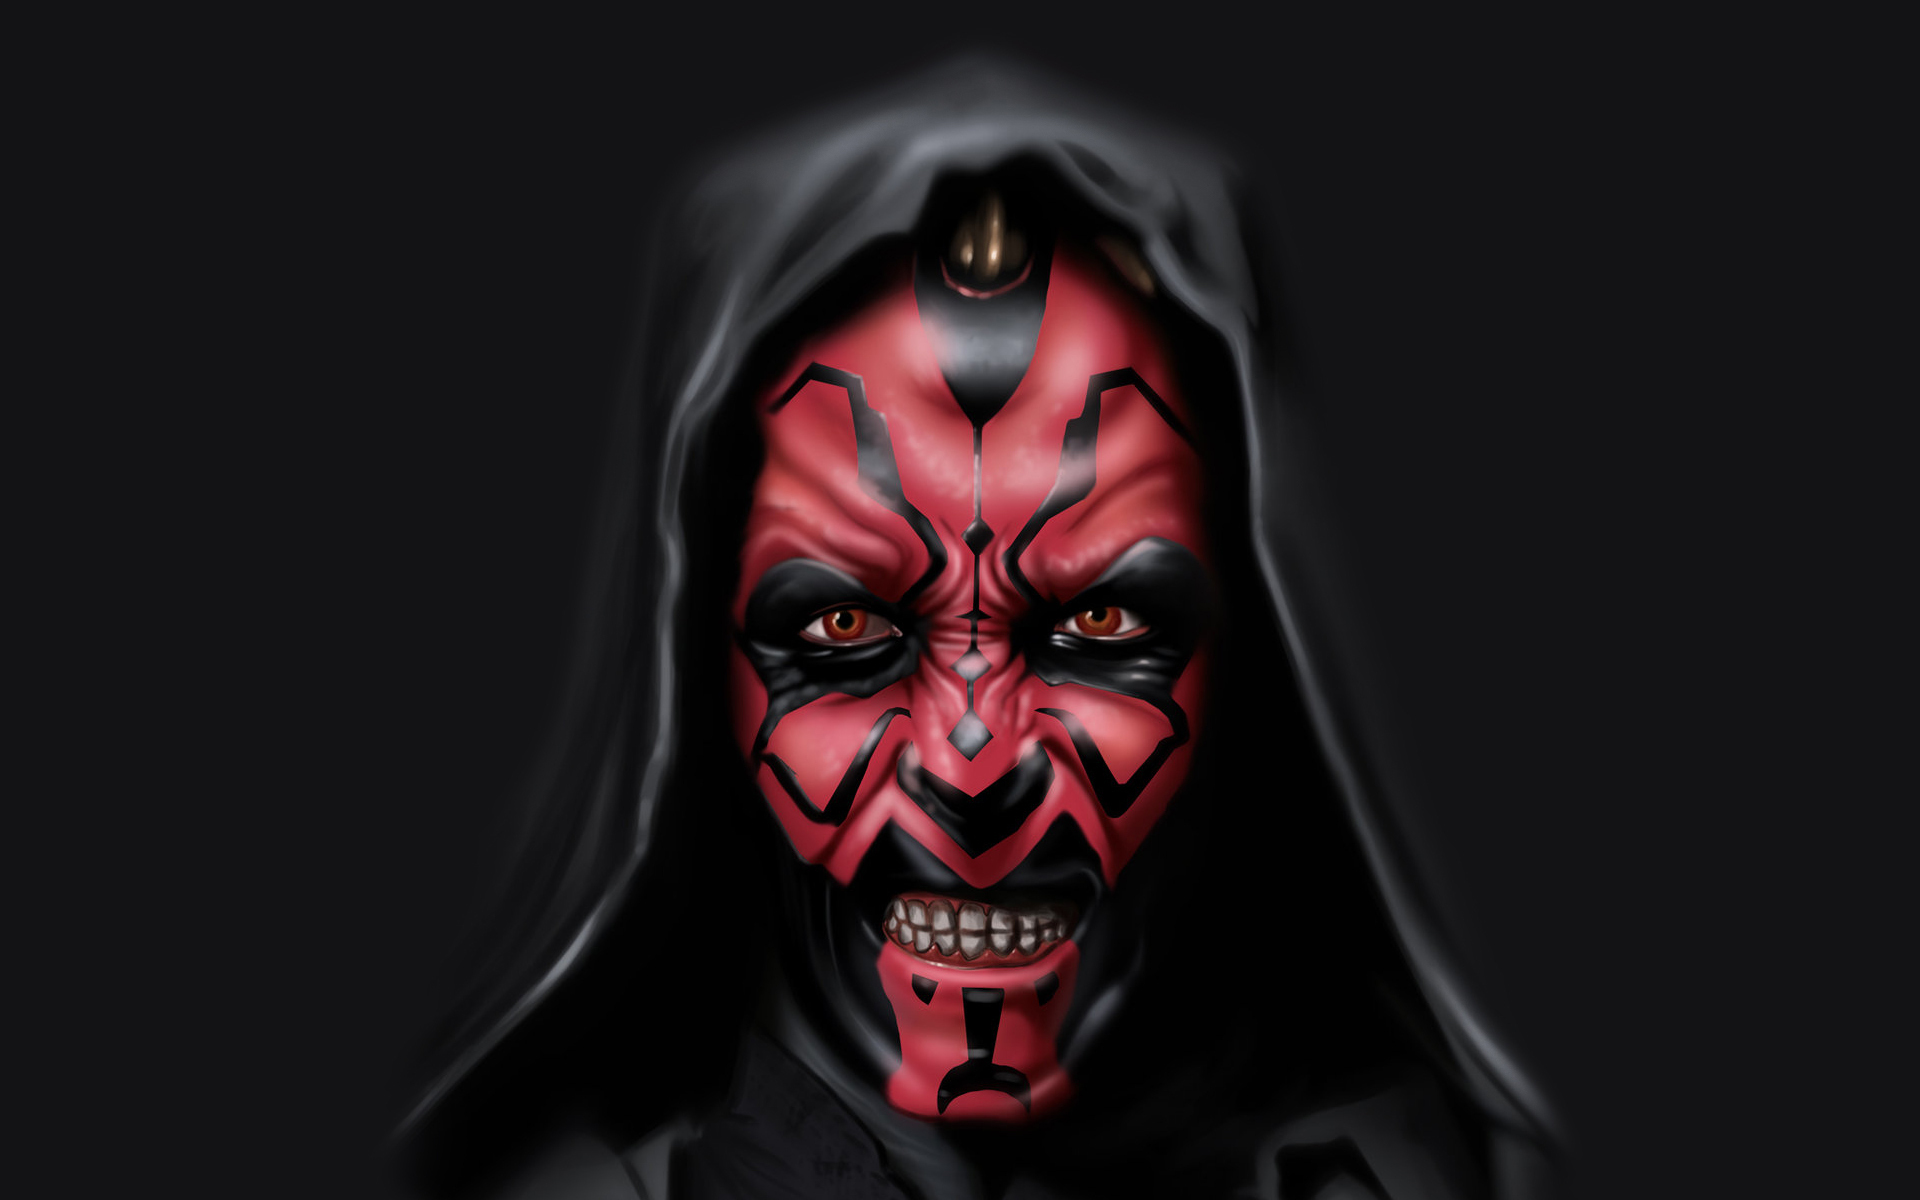  star wars sith wallpapers and images   wallpapers pictures photos